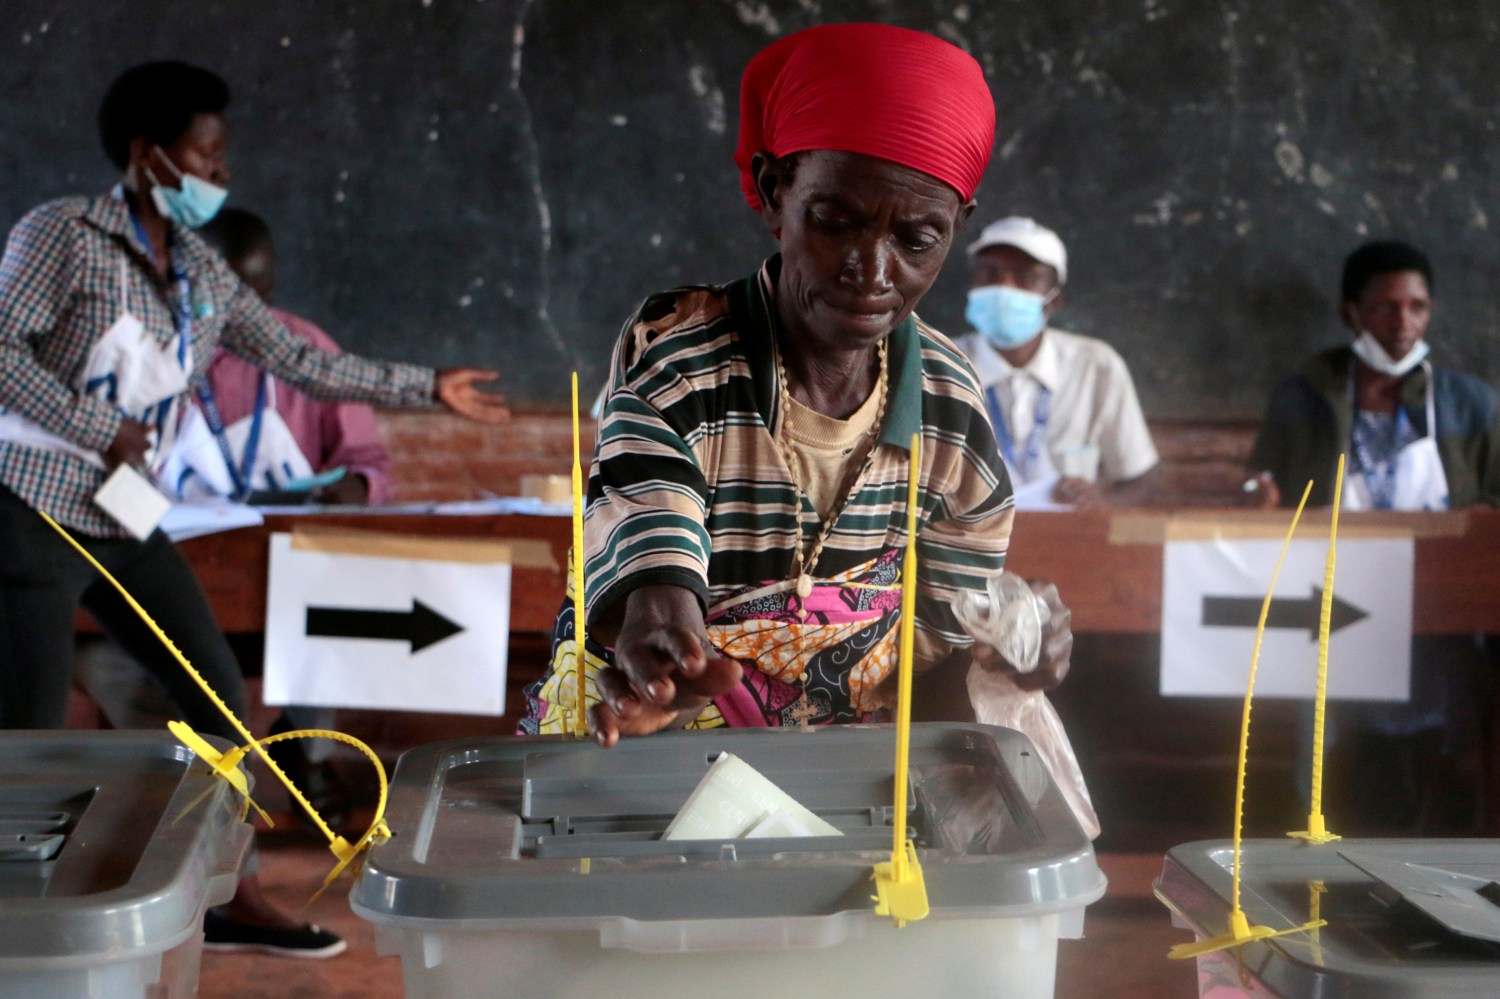 A voter casts her ballot at a polling station during the presidential, legislative and communal council elections, under the simmering political violence and the growing threat of the coronavirus disease (COVID-19), in Ngozi, Burundi May 20, 2020. REUTERS/Clovis Guy Siboniyo